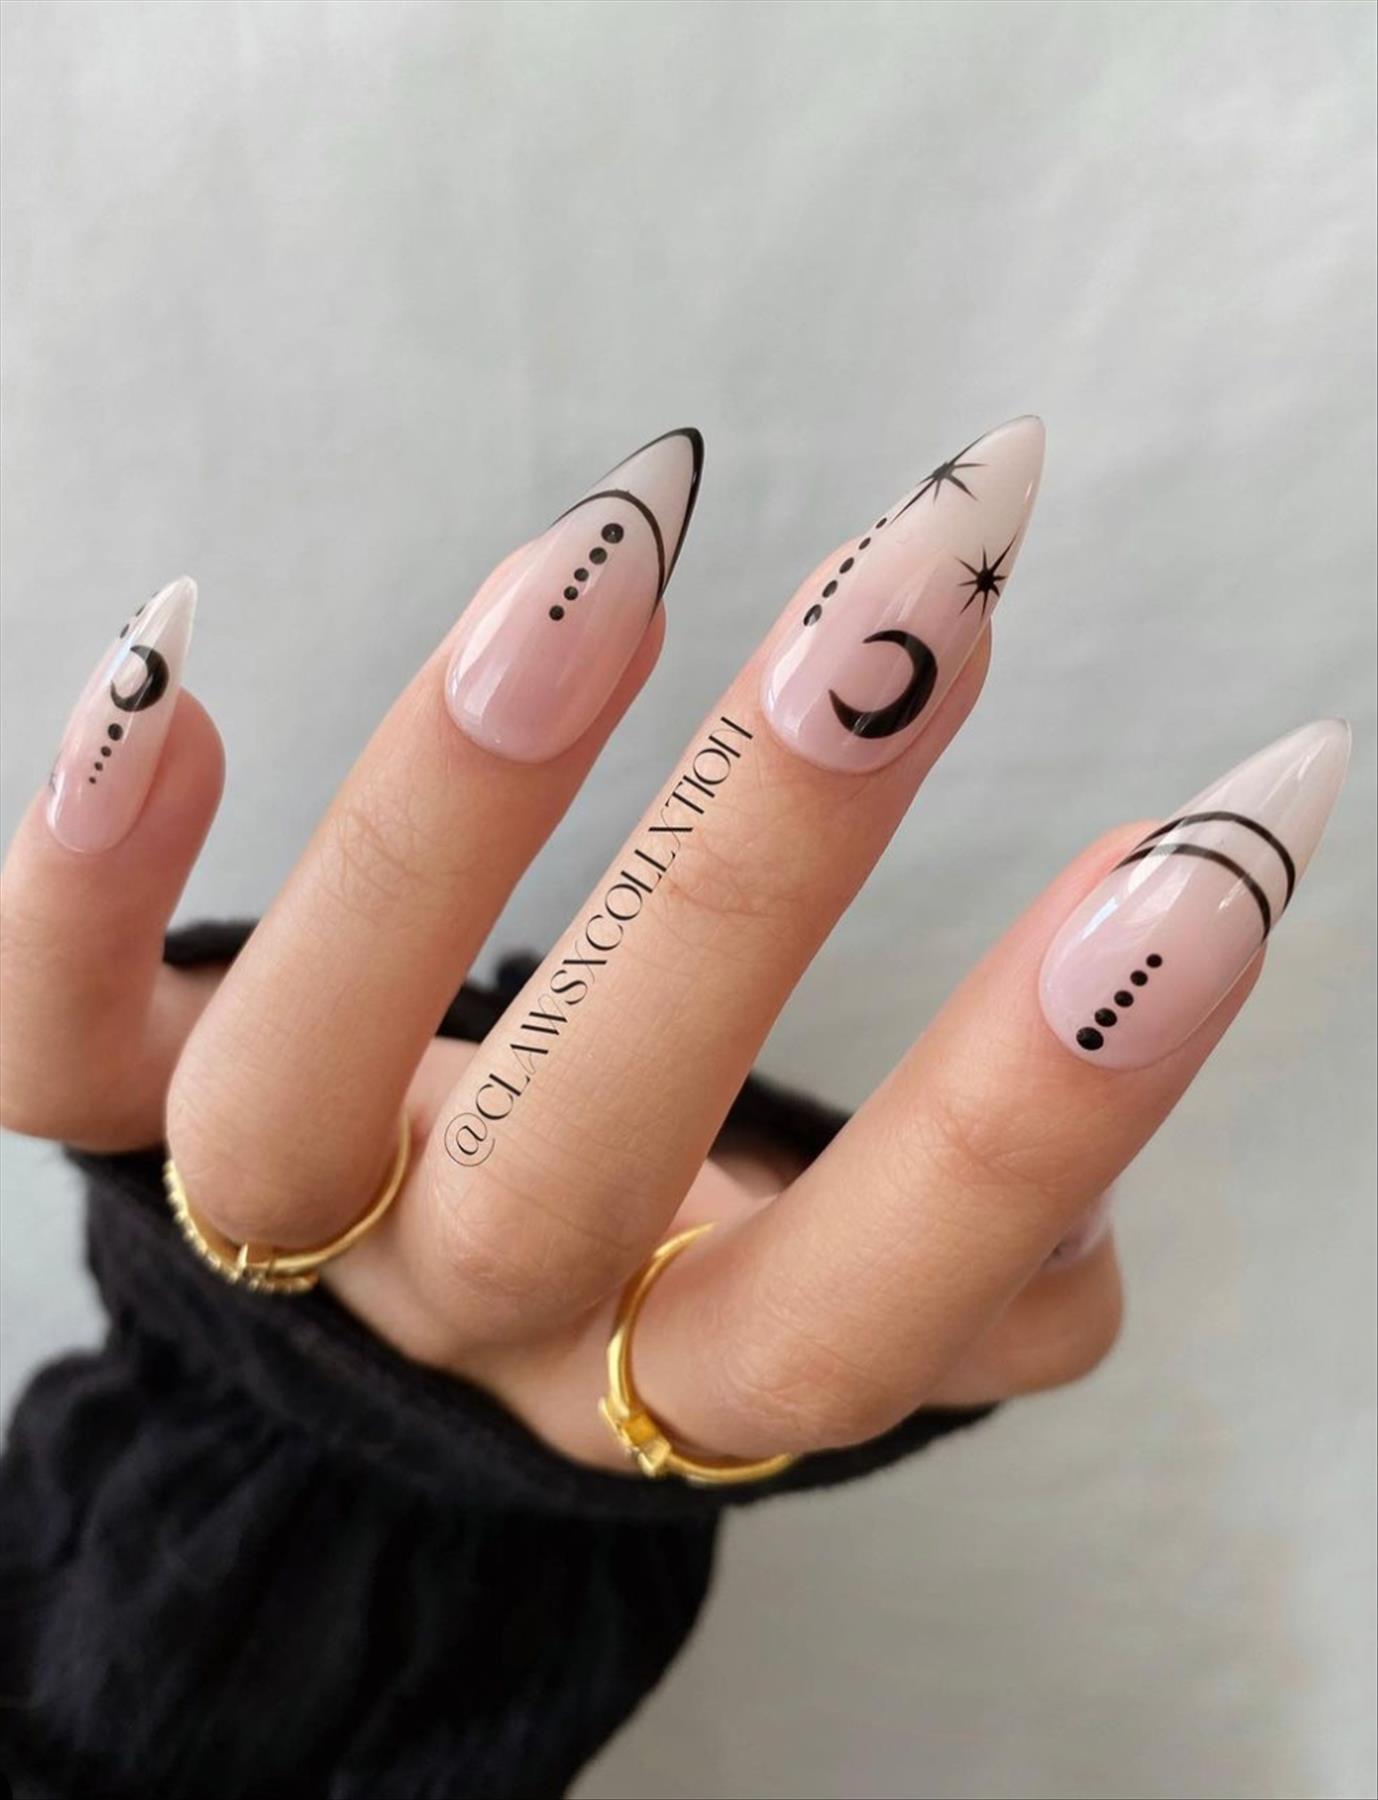 Cool black nail design for winter nails 2022